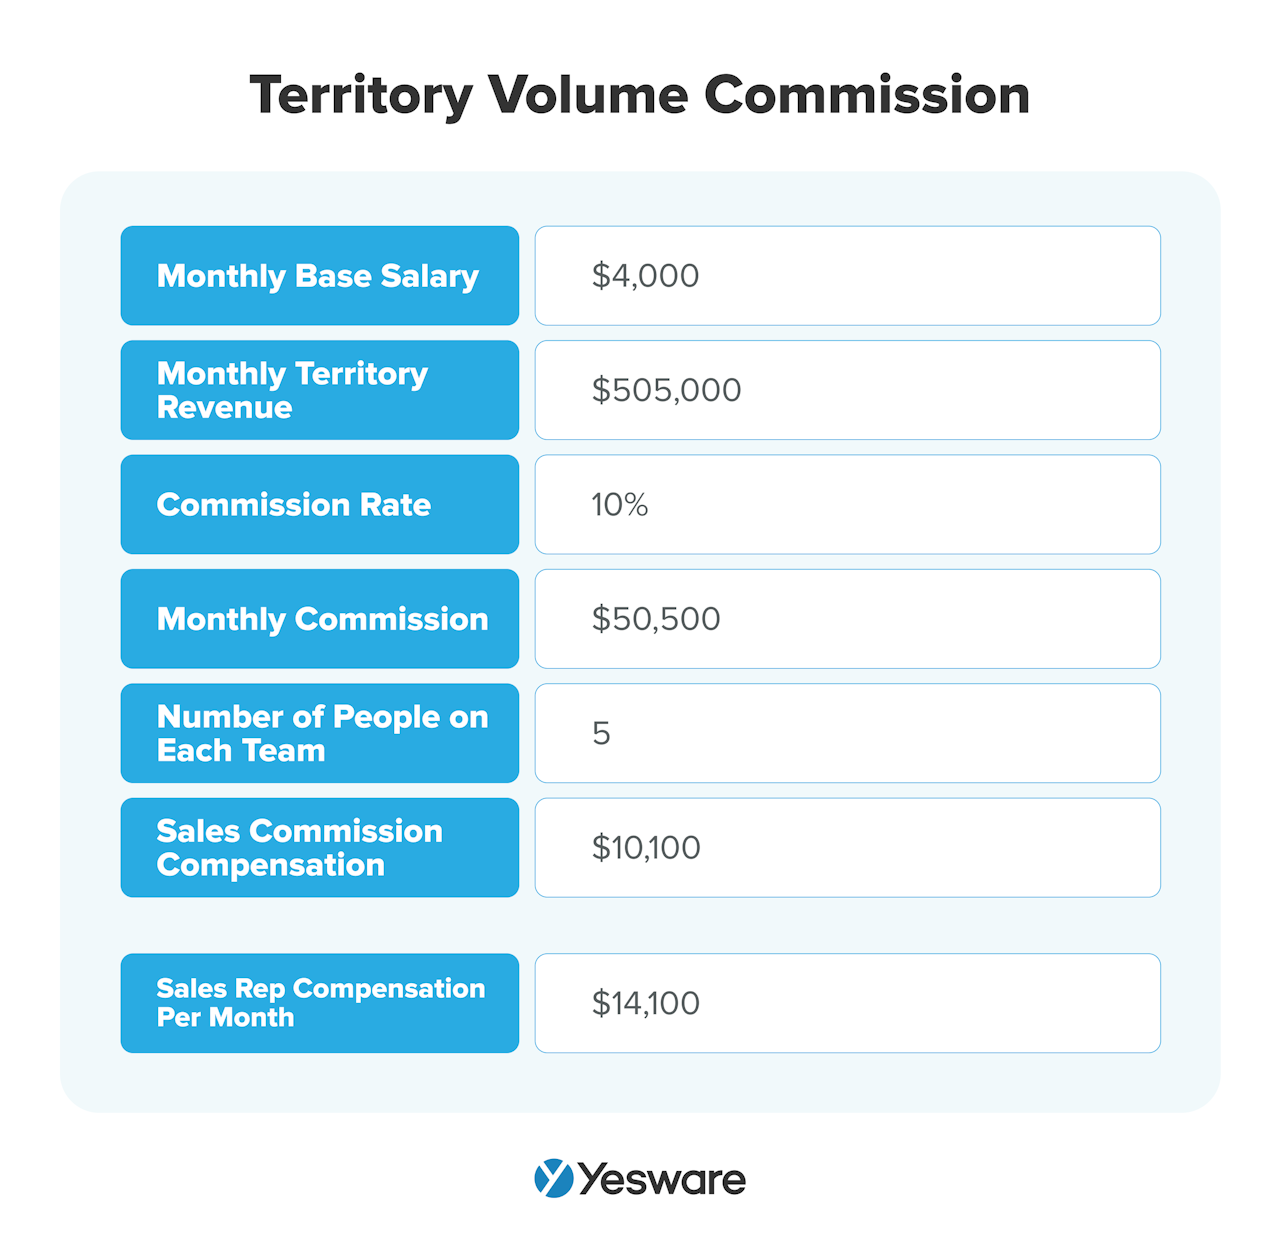 Sales Commission Structure: Territory Volume Commission